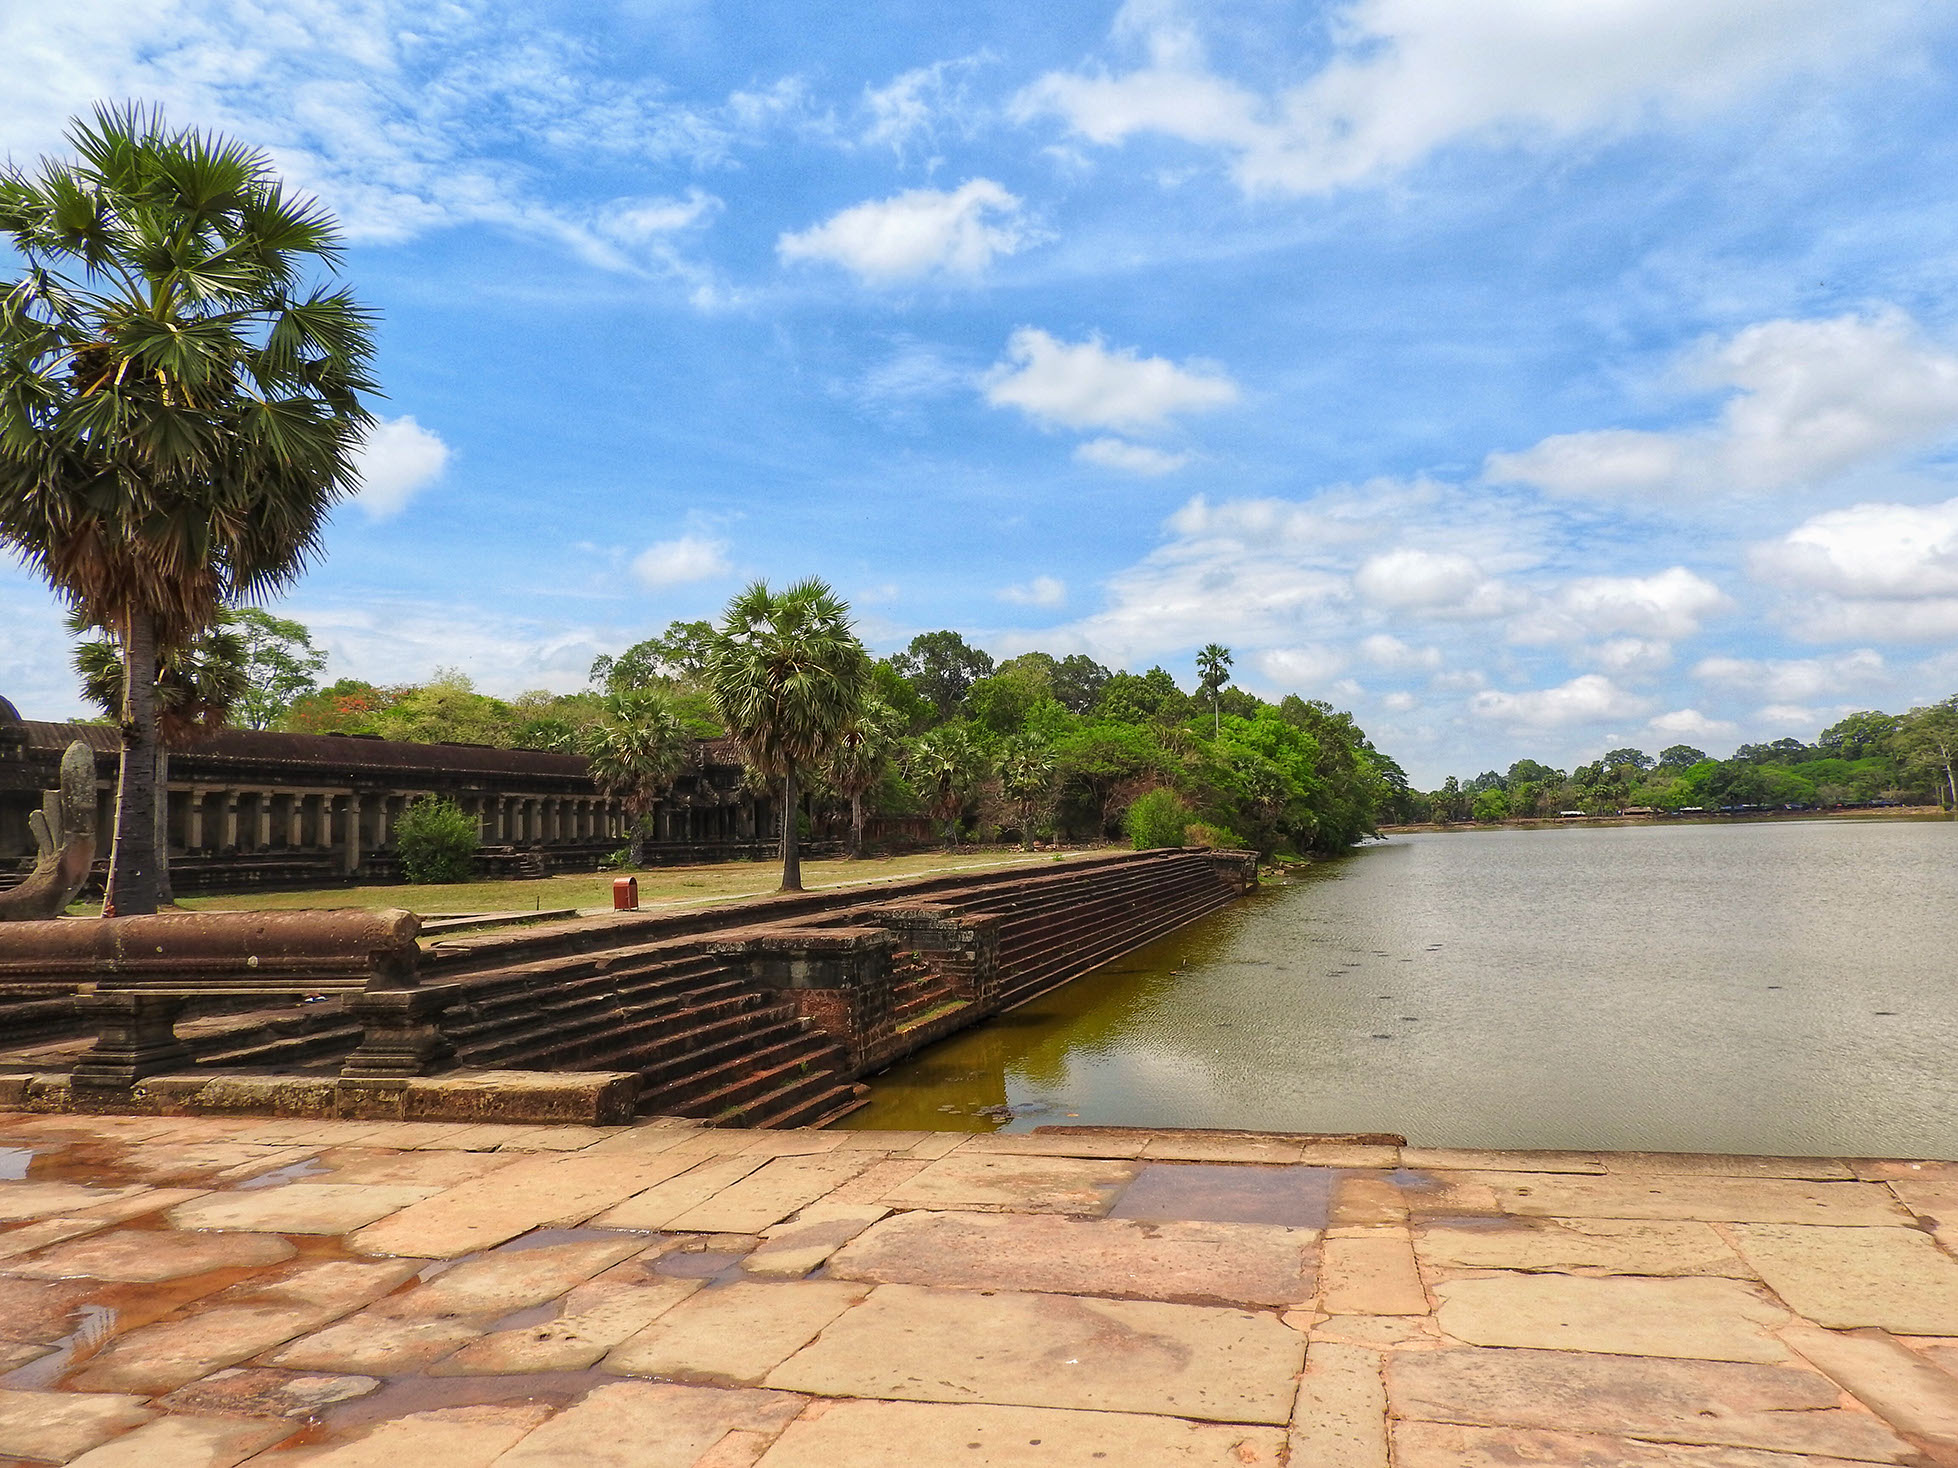 The moat surrounding Angkor Wat temple